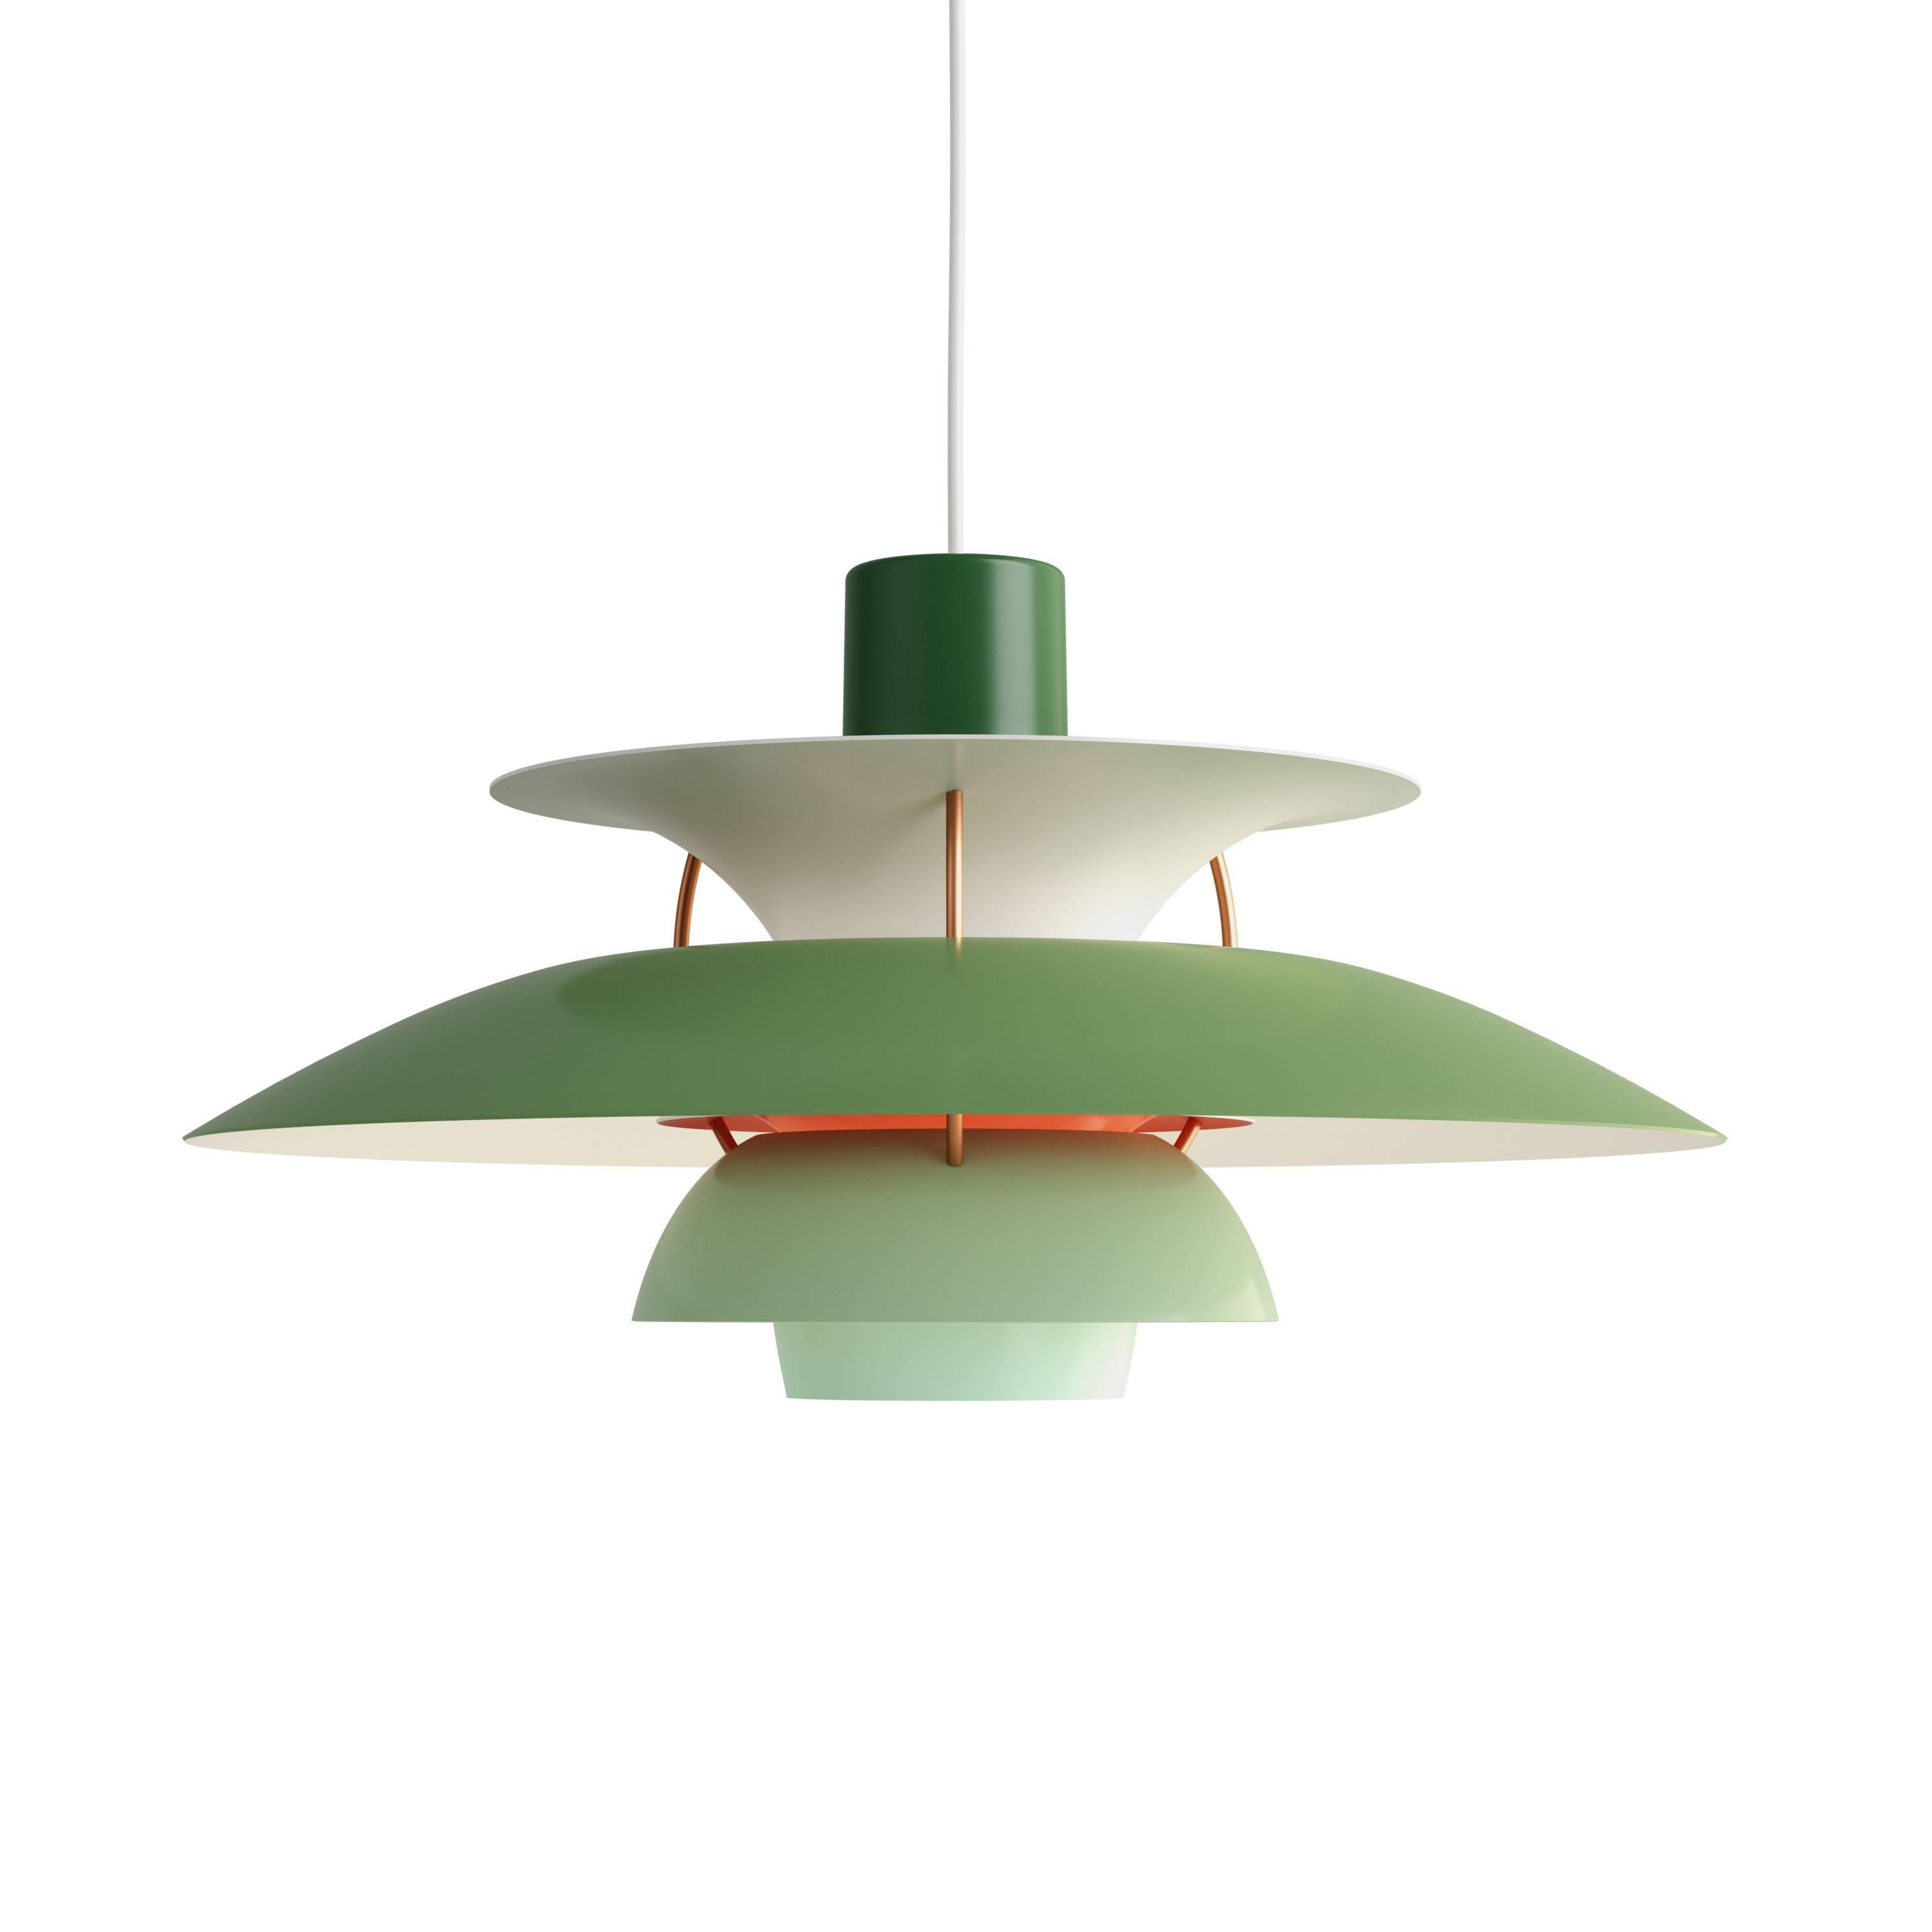 Poul Henningsen PH 5 Pendant for Louis Poulsen in Modern White In New Condition For Sale In Glendale, CA